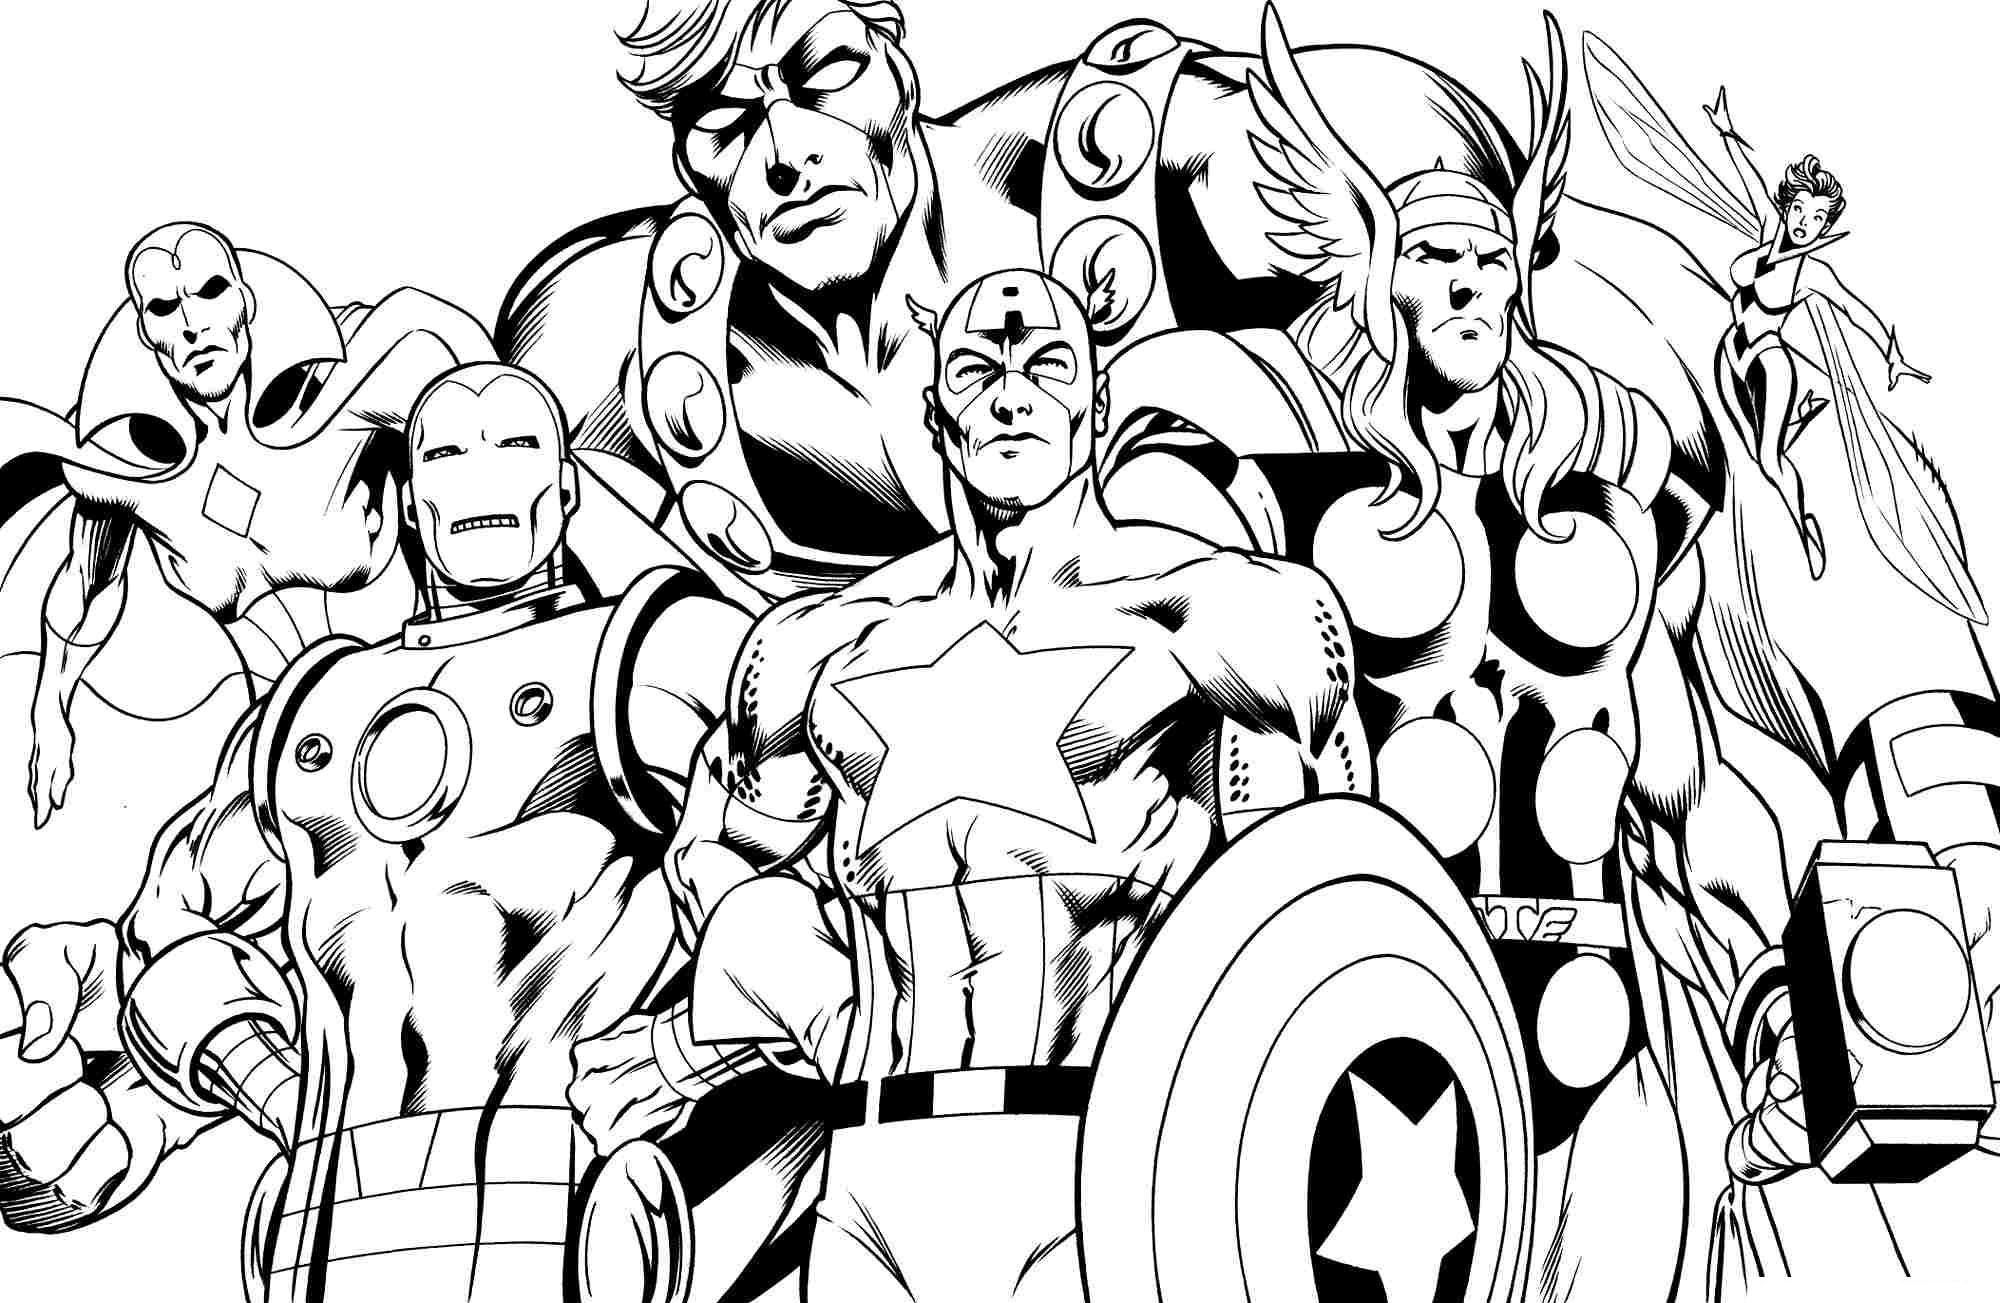 Drawings Avengers (Superheroes) – Printable coloring pages